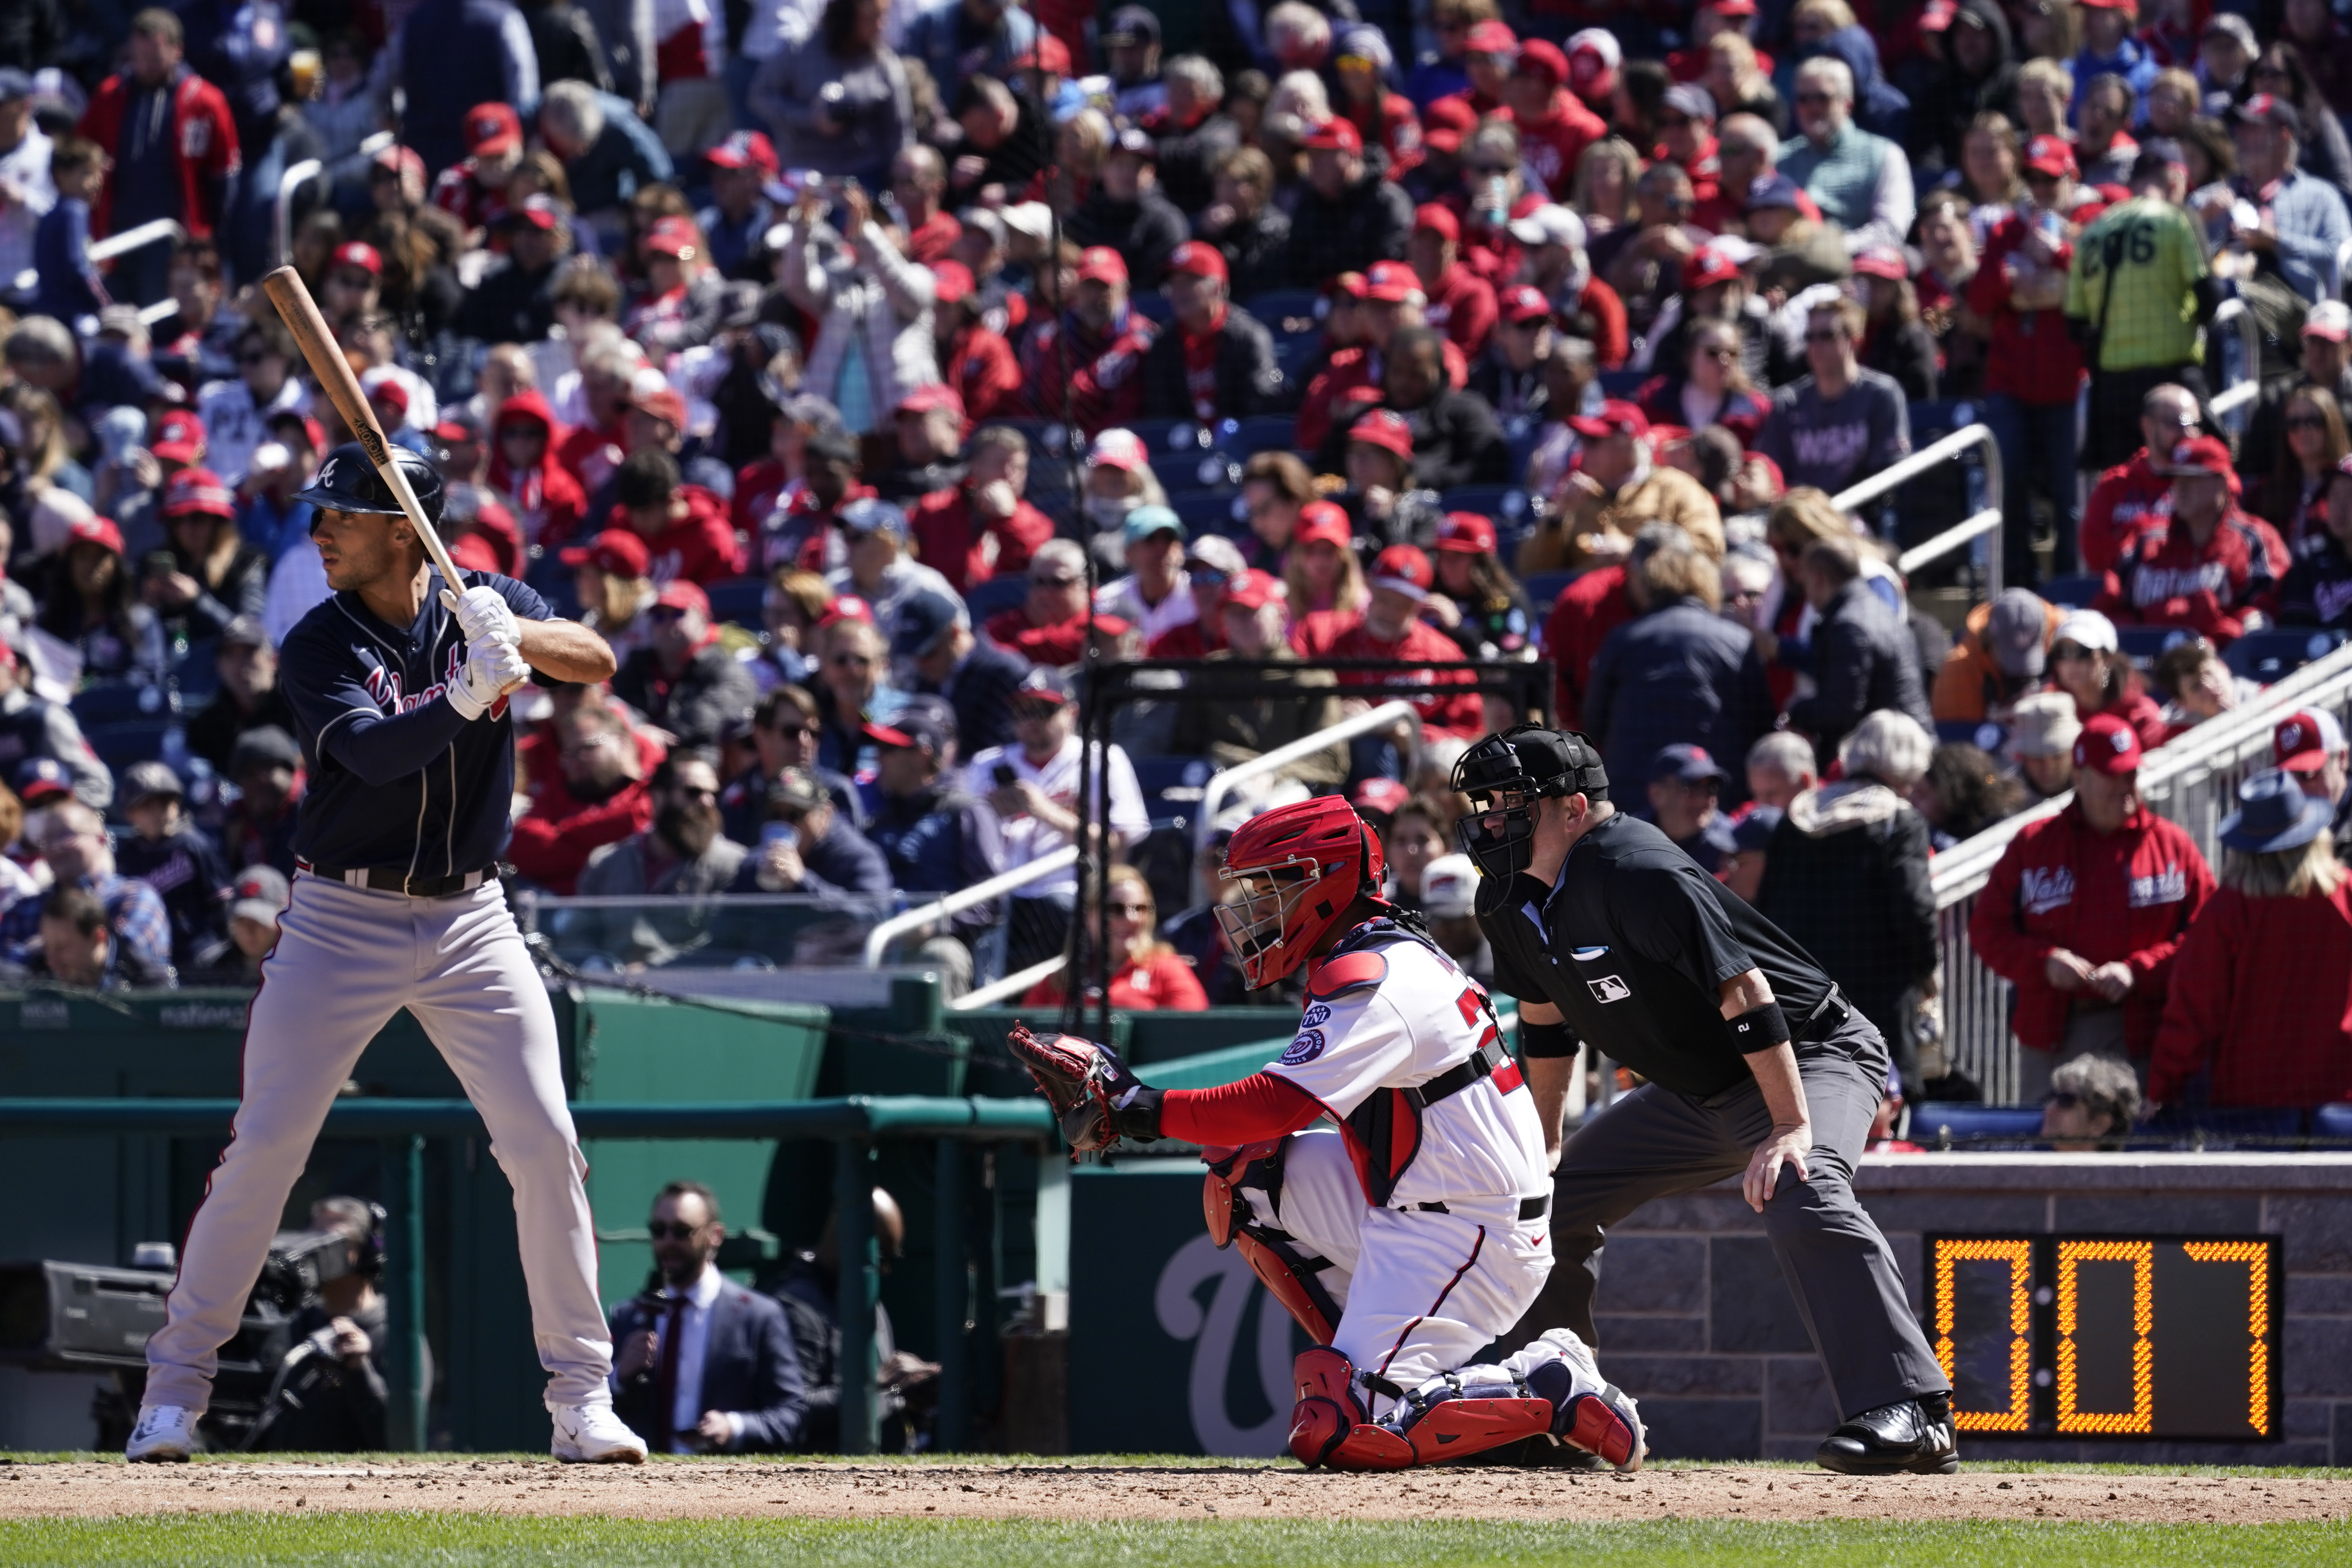 MLB opening day has 14 clock violations, stolen base spike